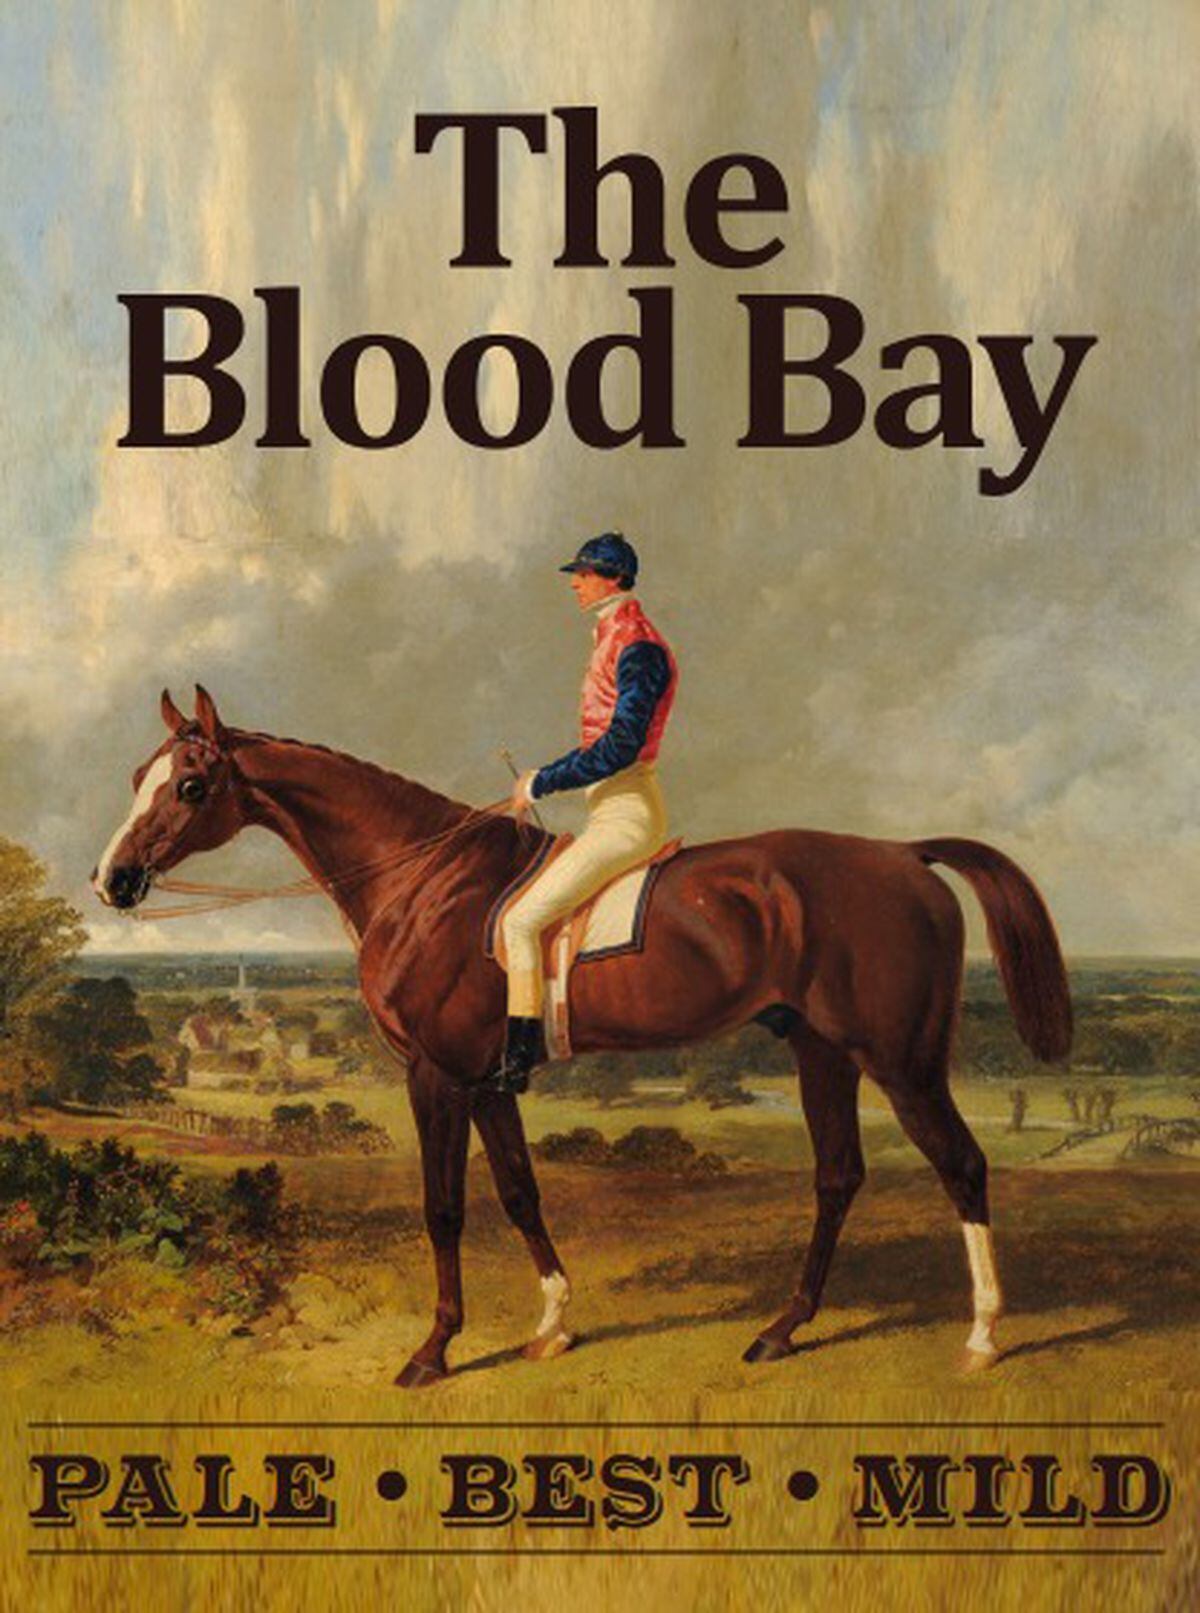 The proposed hanging sign for The Blood Bay pub in Ludlow